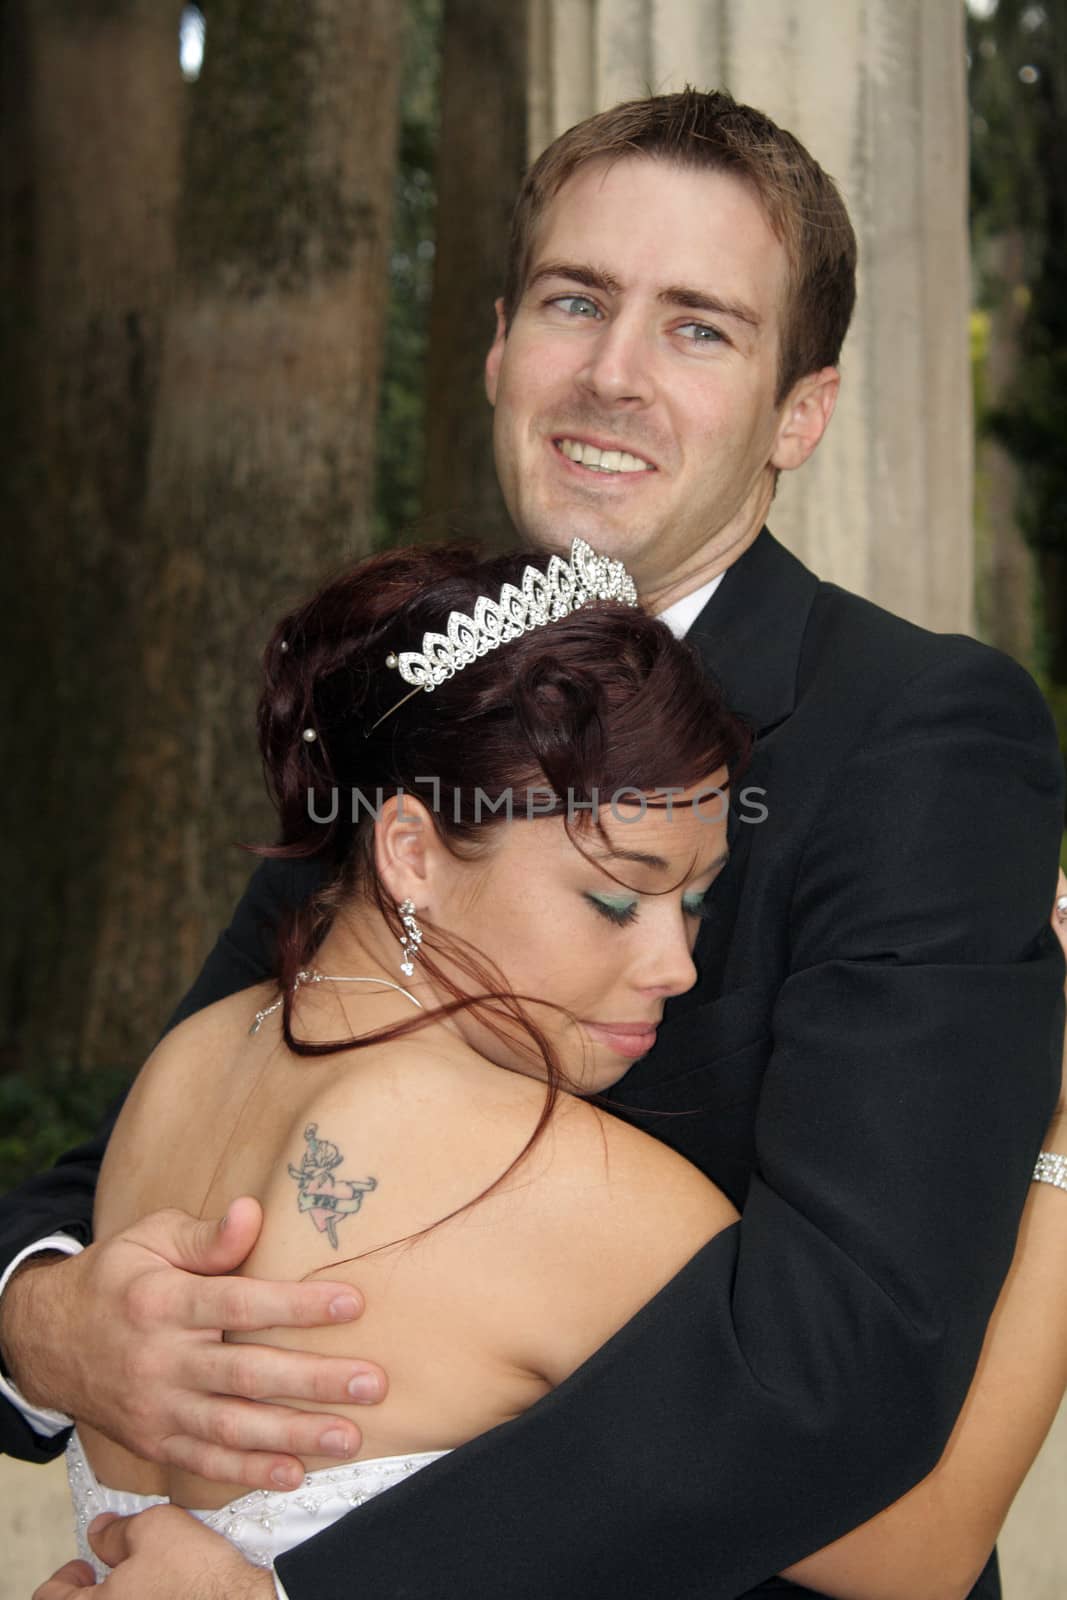 A handsome groom embraces his bride outdoors.